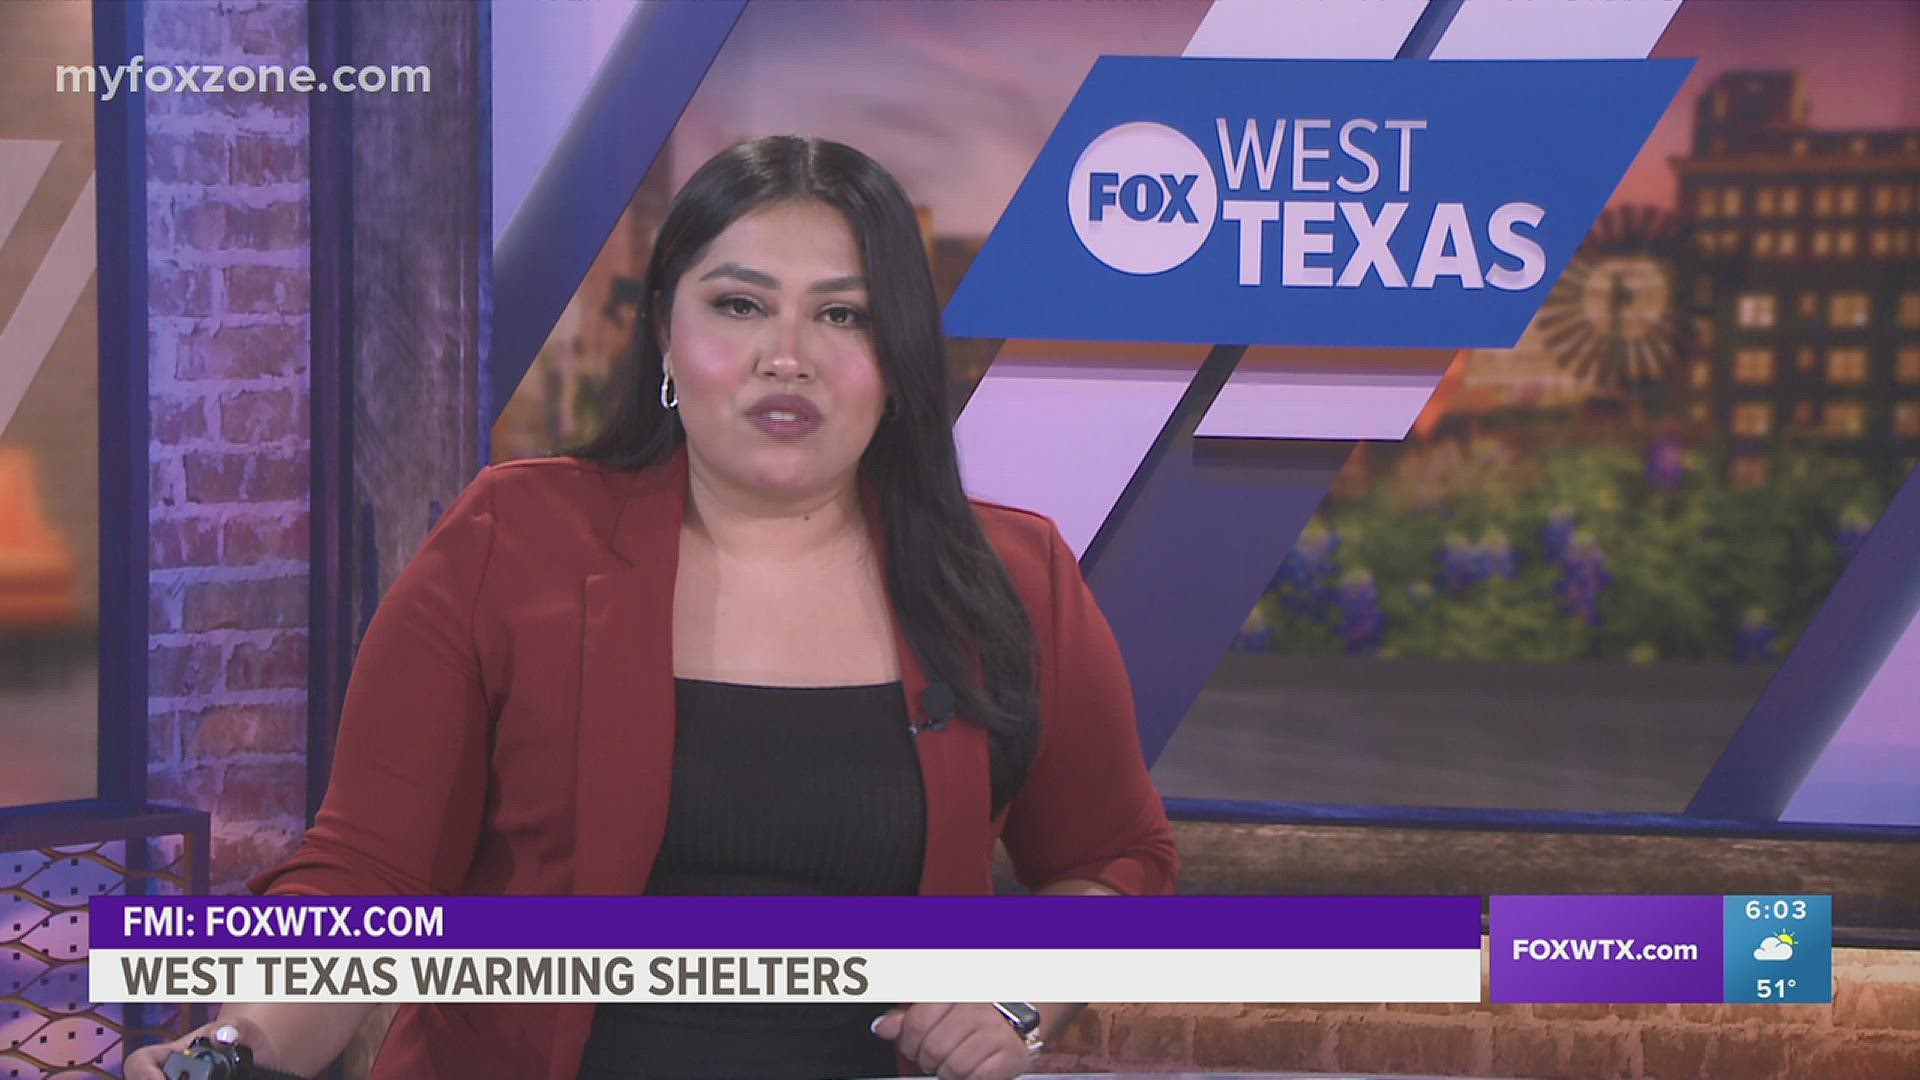 Several cities in West Texas have opened warming shelters as an arctic front moves across the region sending temperatures plummeting.